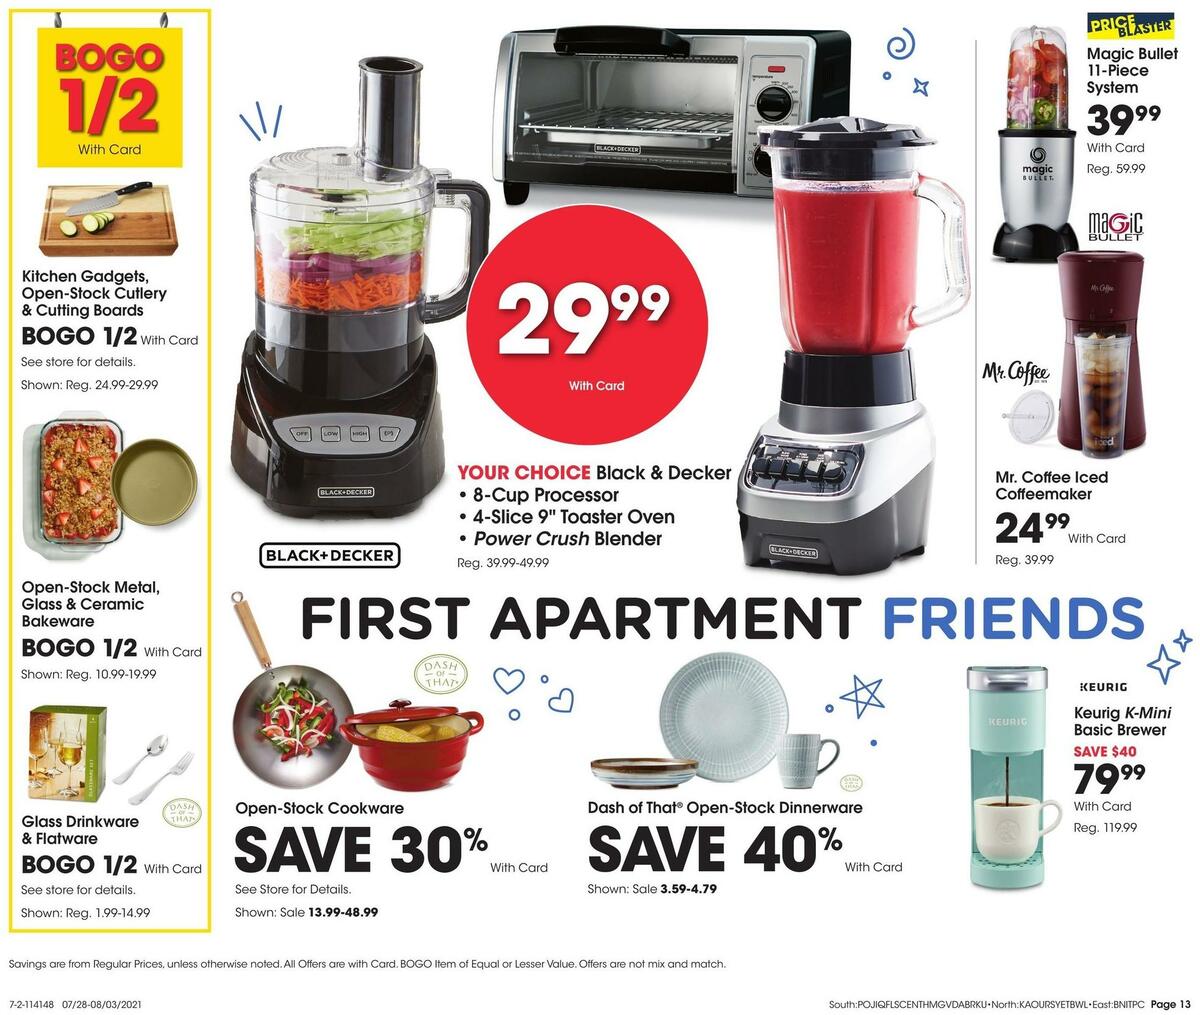 Fred Meyer General Merchandise Weekly Ad from July 28